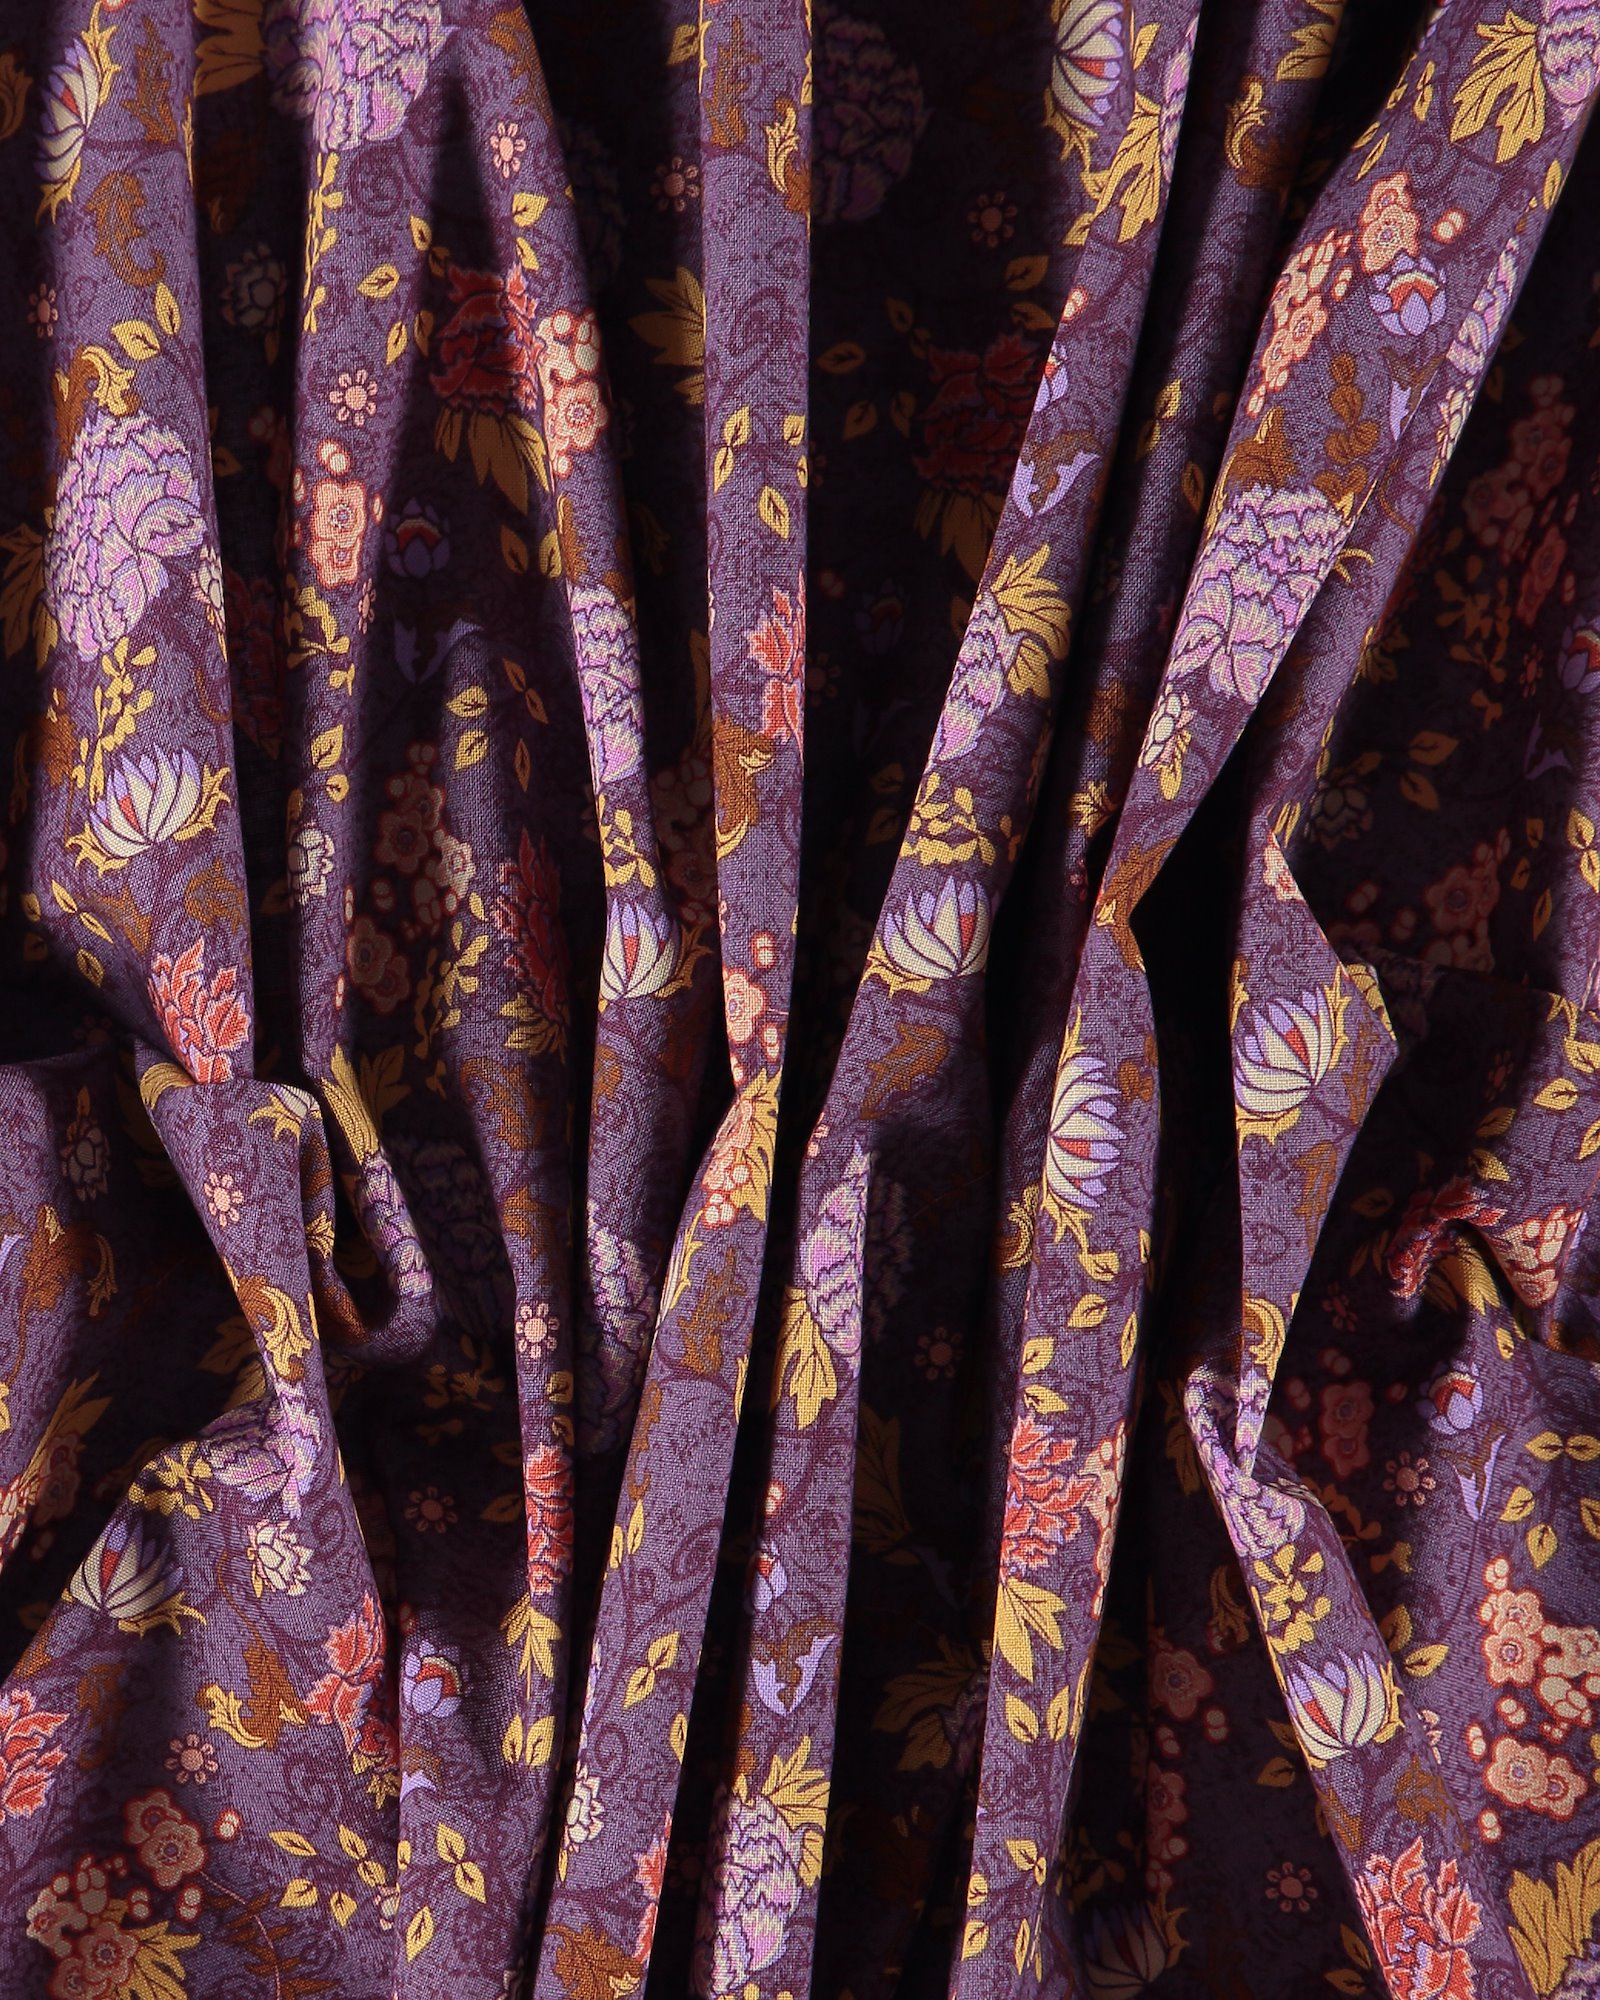 Cotton dark dusty purple with flowers 852347_pack